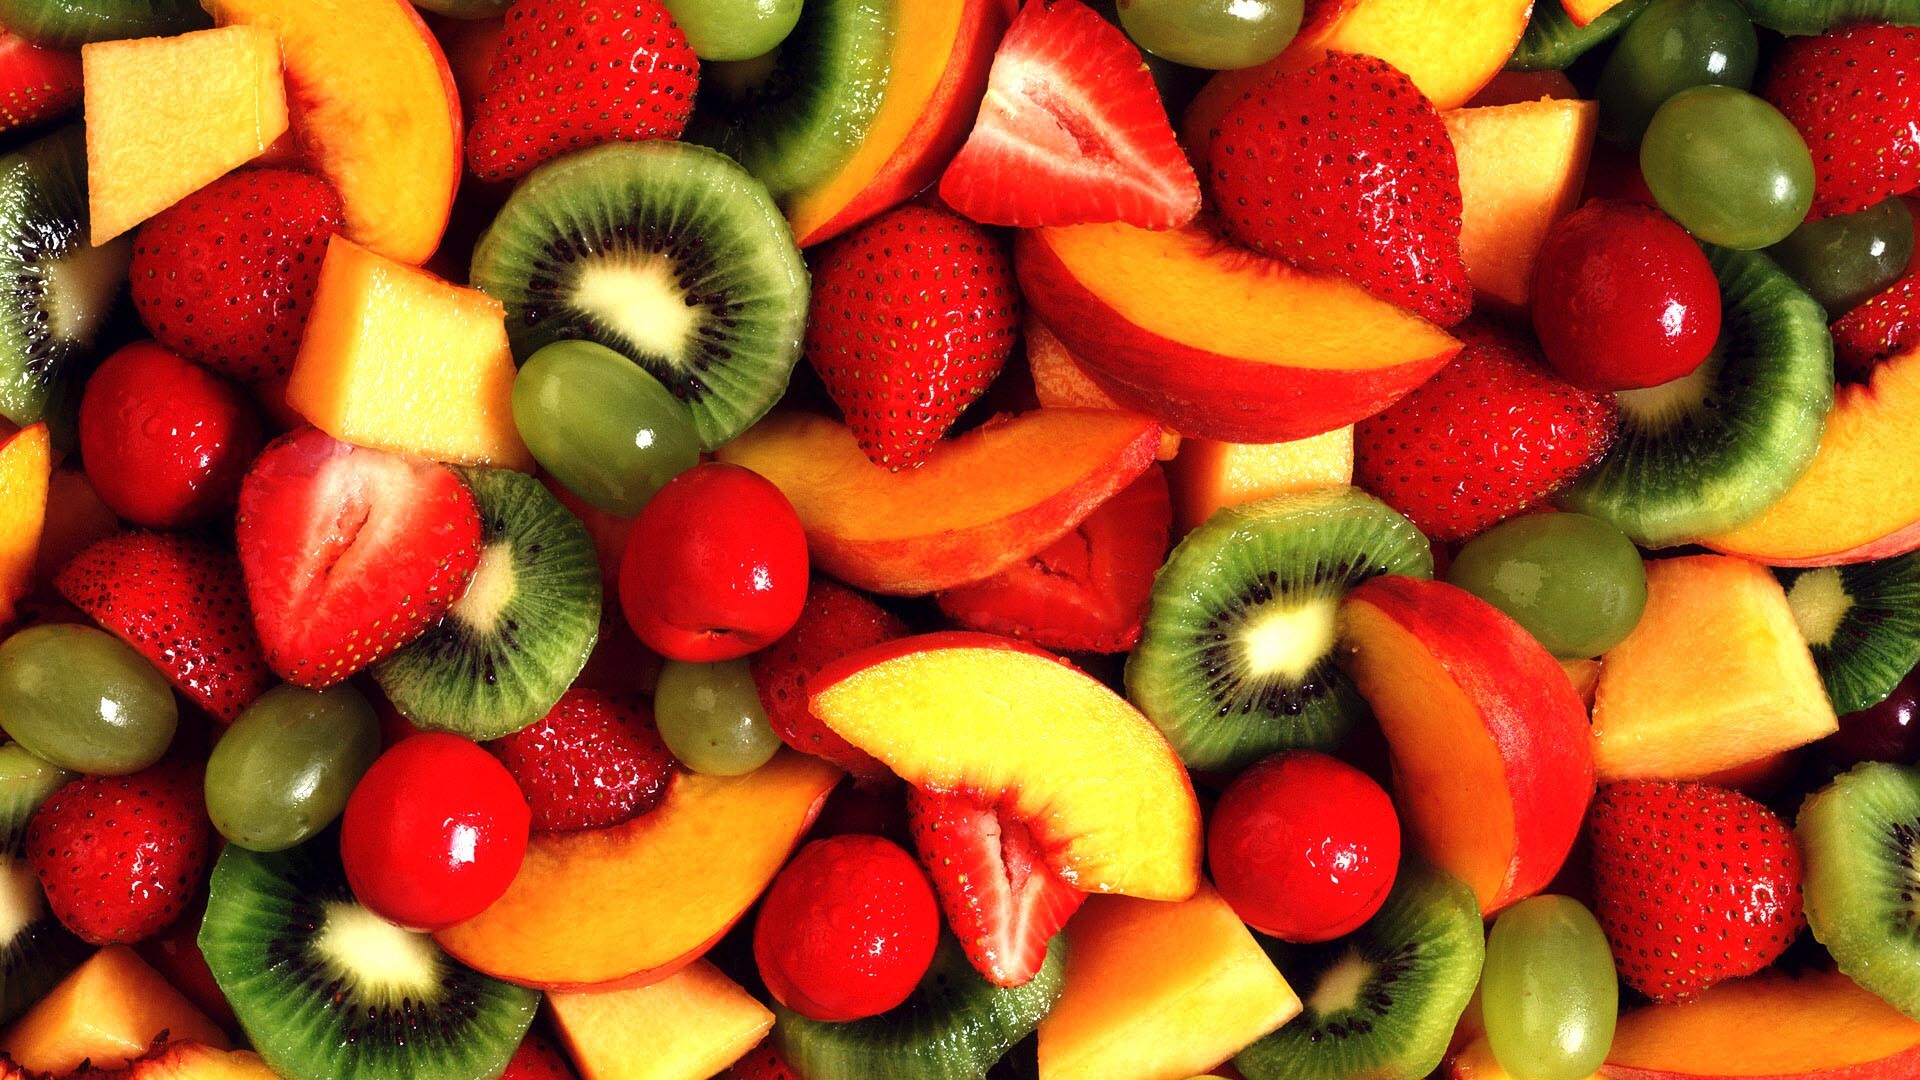 Fruit: The edible portion of the plant that develops from a flower and contains seeds, Peach, Kiwi. 1920x1080 Full HD Background.